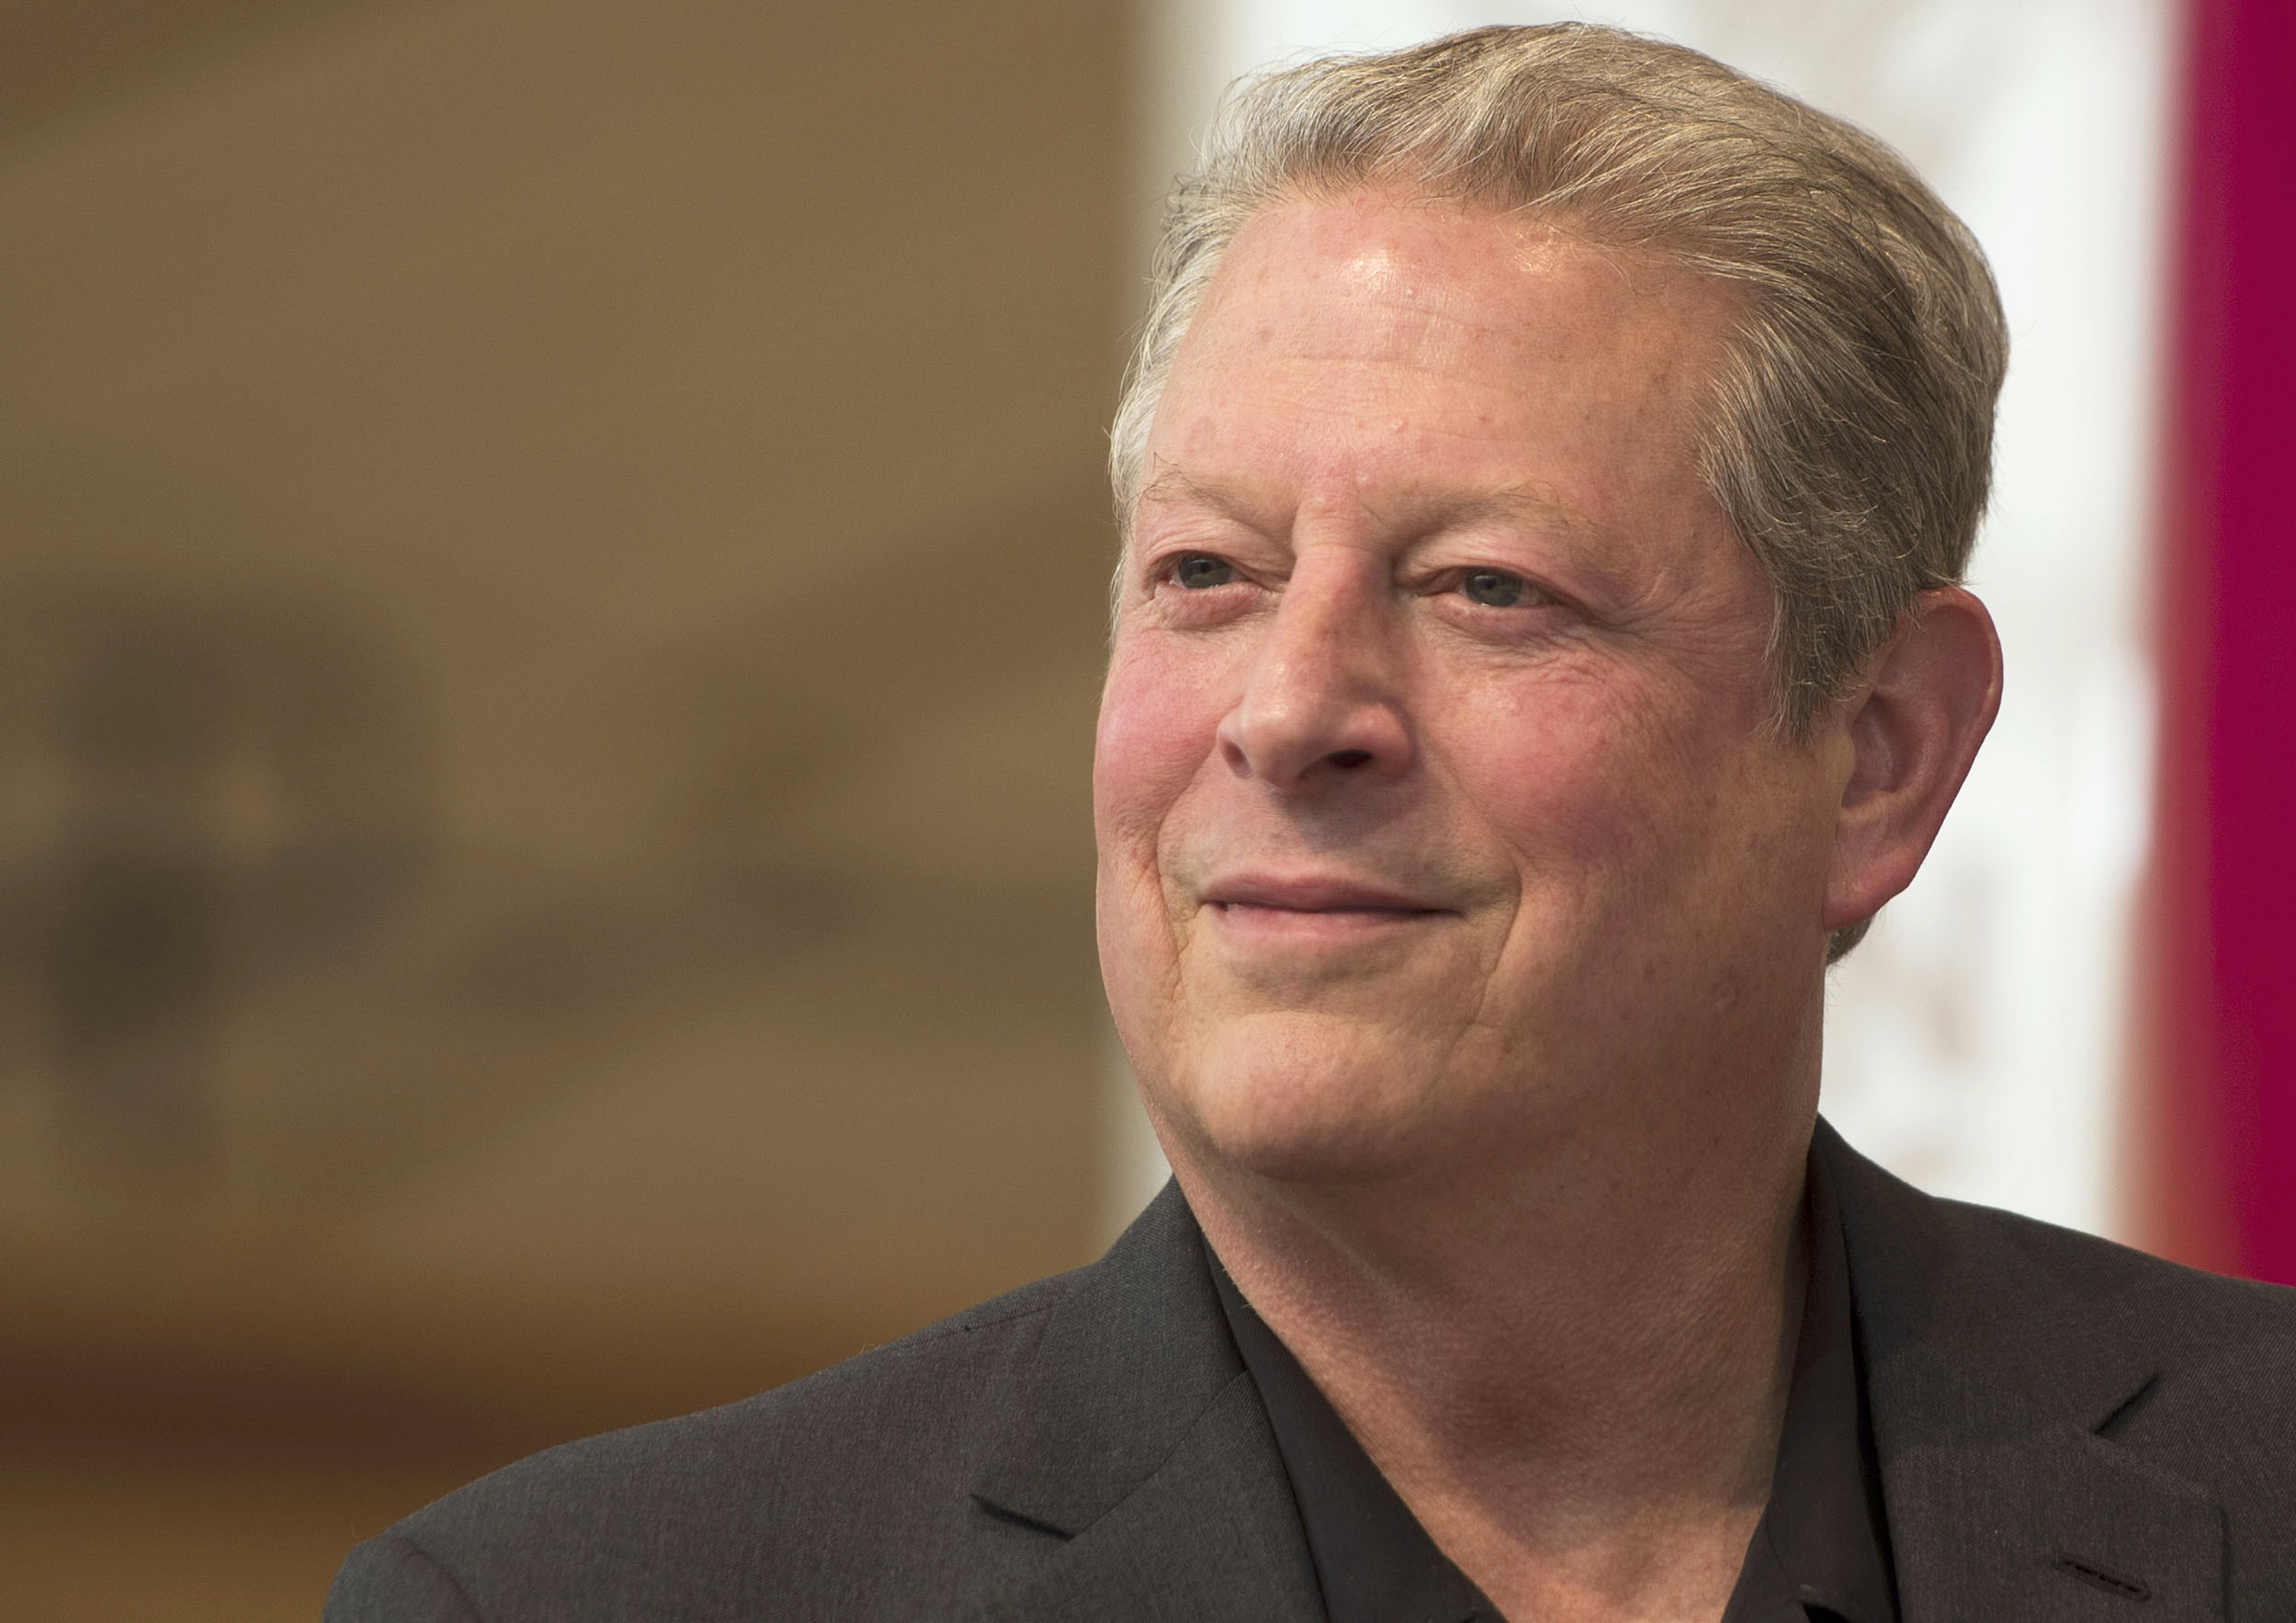 Al Gore speaks at  Afternoon of Conversation during the 2014 Aspen Ideas Festival at the Aspen Institute on June 30, 2014 in Aspen, Colorado. Leigh Vogel&mdash;Getty Images (Leigh Vogel&mdash;Getty Images)